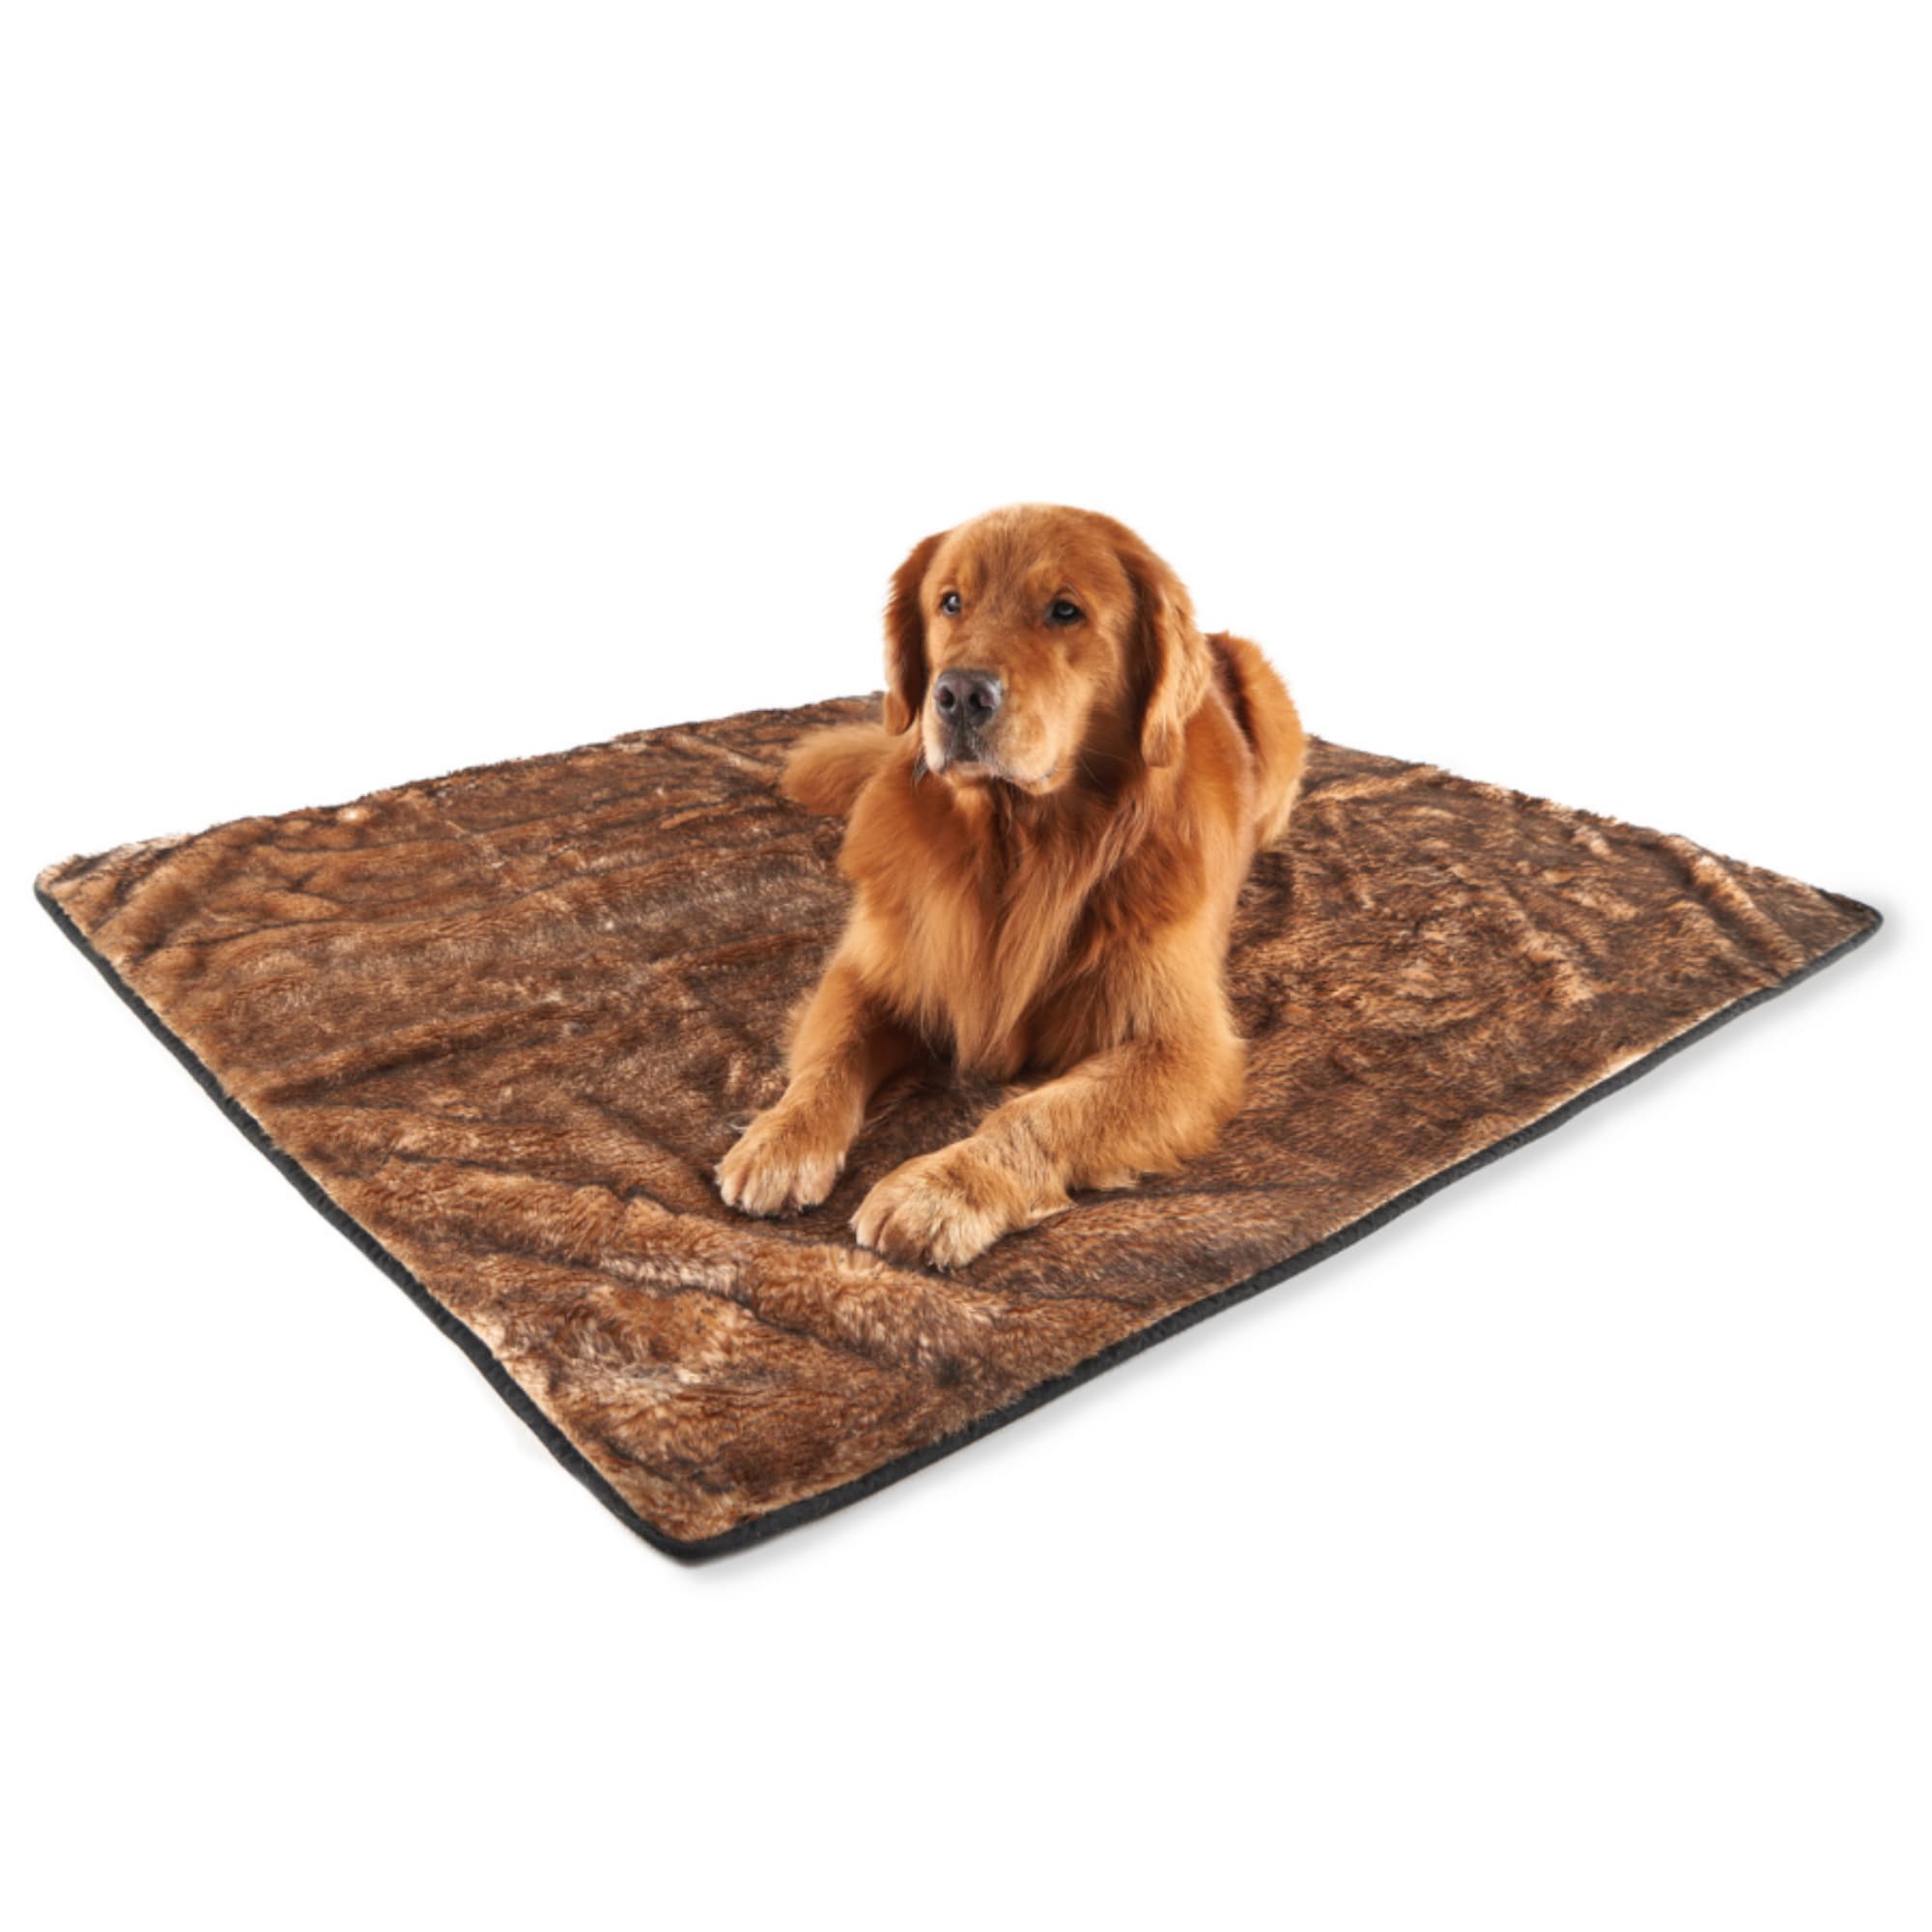 My Doggy Place Dog Mat for Muddy Paws, Washable Dog Door Mat, Brown, L 